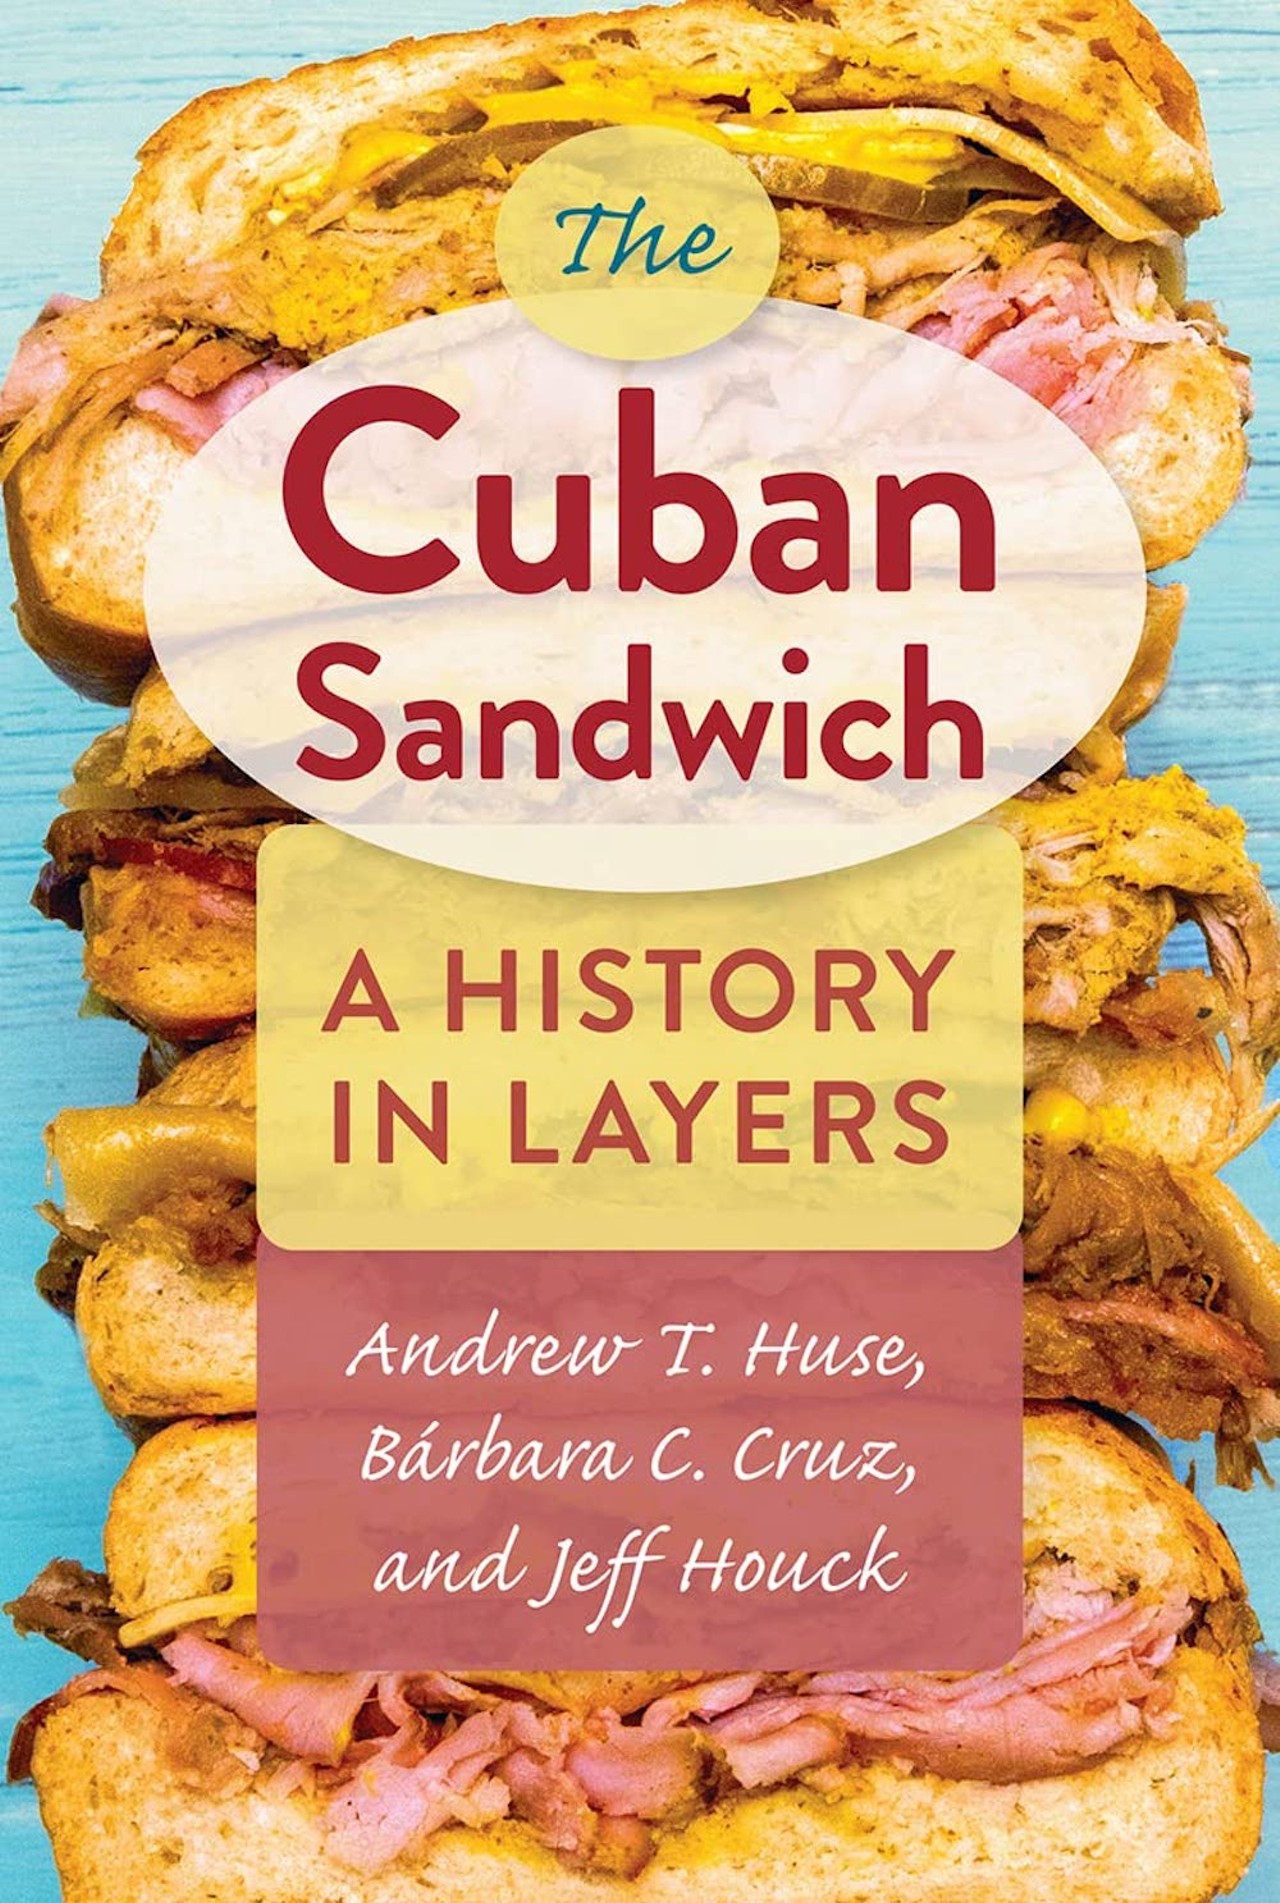 
The Cuban Sandwich: A History In Layers by Andrew T. Huse, Bárbara C. Cruz, Jeff HouckIf there was a must have book for self-respecting Tampeños, this is it. Across nearly 150 pages, this gastronomical triumvirate of local historians present deep research that criss-crosses the northern hemisphere from Cuba, to Florida, Nevada, Chicago, the east coast, all the way to Ireland, all in the name of sending to press a definitive history of Florida’s iconic sandwich.FFO: Going down the wormhole, salami, being the most interesting person at the lunch counter (University Press of Florida, $24.95)